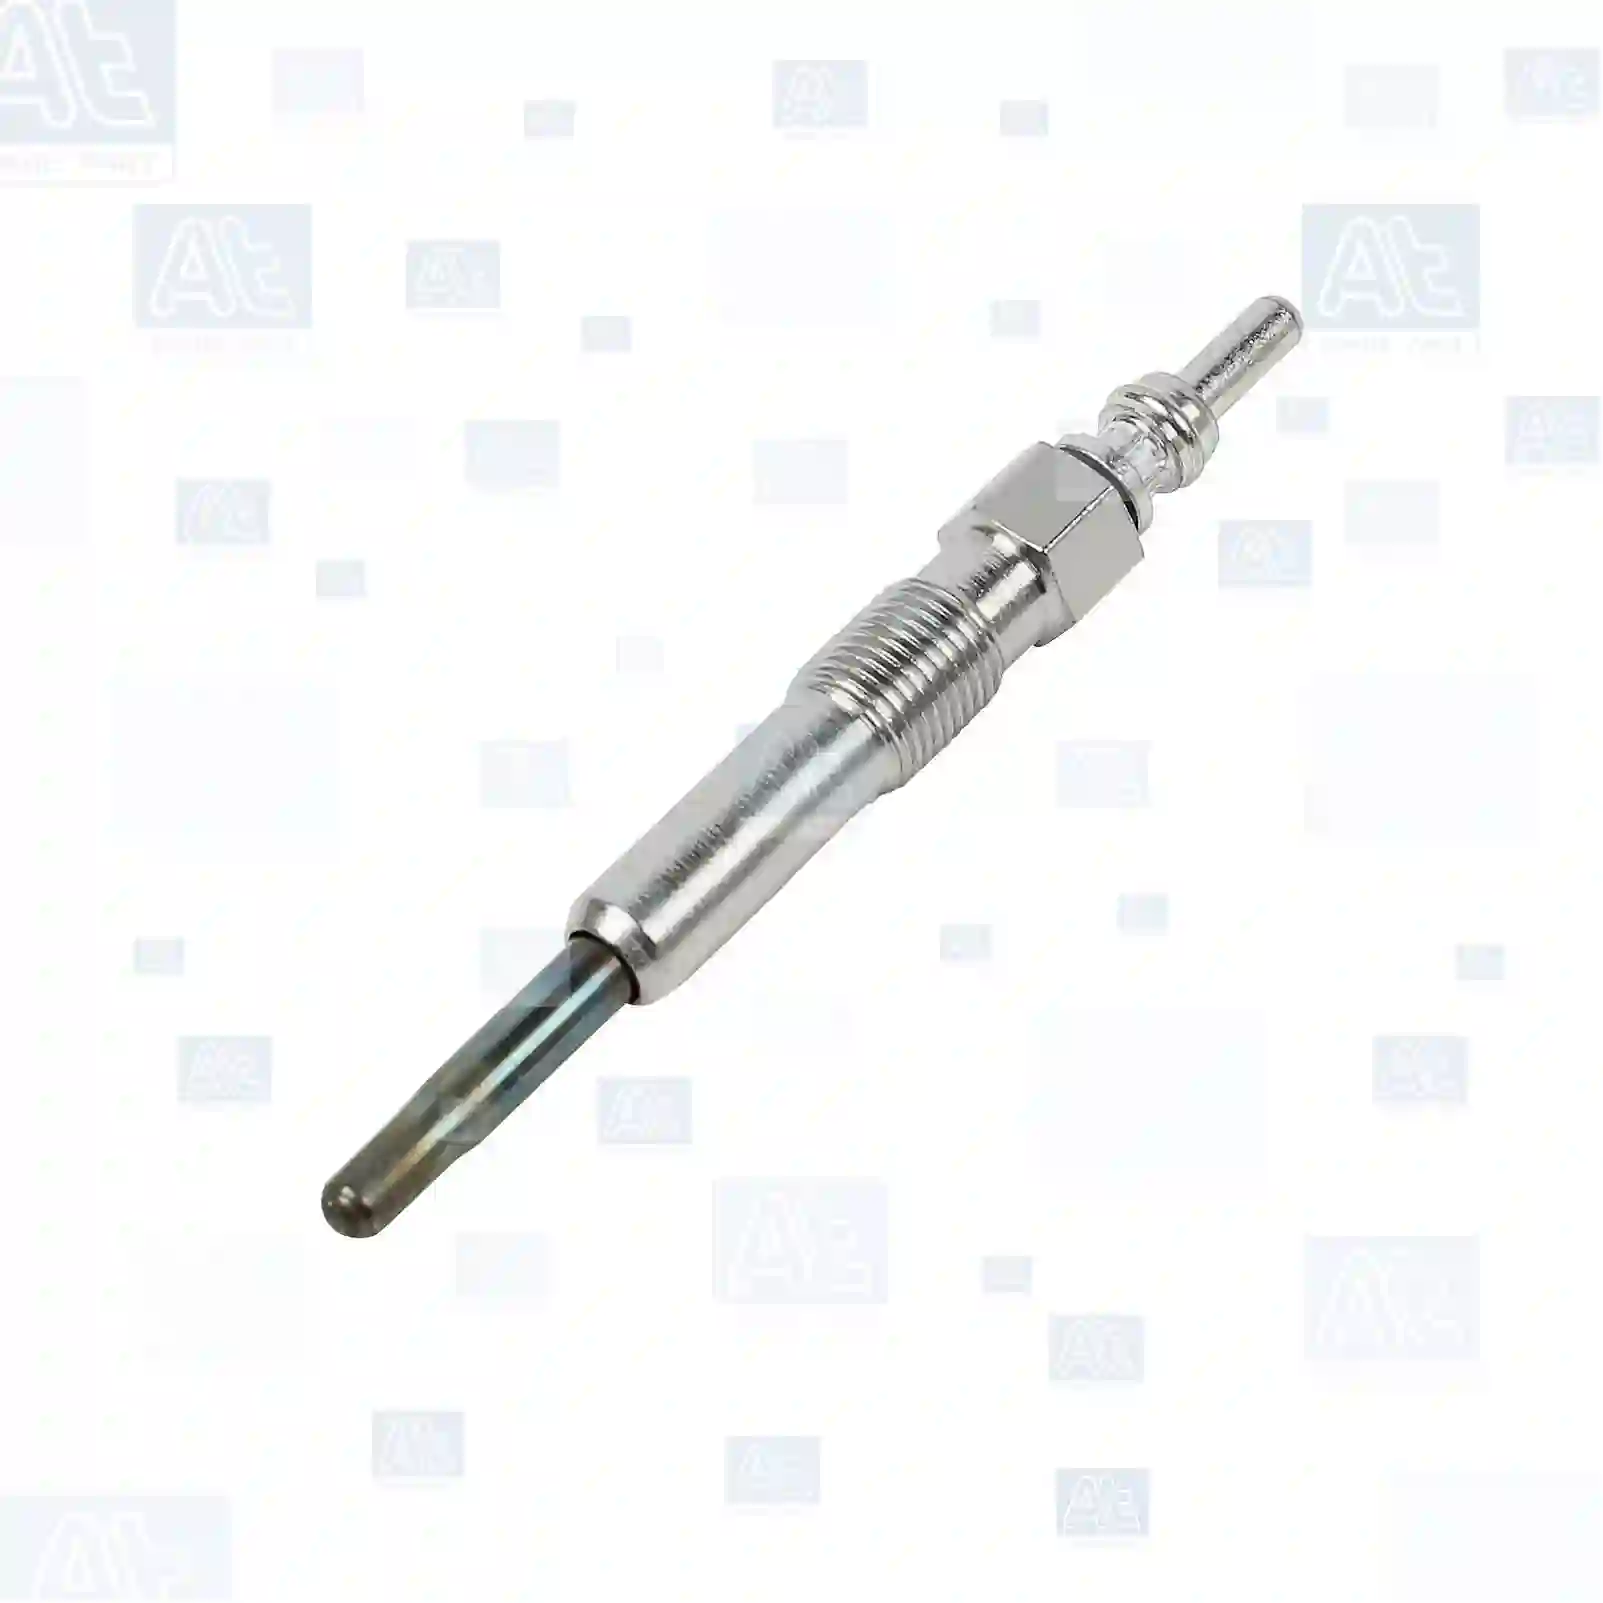 Glow plug, 77700067, 60079, 46072001, N10140101, N10140102, N10140103, N10140104, N10140105, N10302101, N10302102, 5066840AA, KJ0741144, 59624J, 596258, 7700111323, 7700855865, 7700856238, 8200090817, 8200434855, 8200490950, 8671004853, 90210824, 00773592, 05961881, 05973752, 05973753, 46072001, 50032390, 762266740, 77359200, 95534788, 9616472480, 96165724, 1029446, 1029461, 1037204, 1090519, 1669977, 6776964, 6852967, 95VW-6M090-AA, 95VW-6M090-AB, EZD33, B44SR, 1214020, 1214082, 32017061, 32017084, 4402724, 4409469, 4416912, 4419054, 88900722, 88900730, 9110724, 91158701, 93183740, 93189648, 93196829, 93196922, 95508490, 1106500QAG, 5951881, 5973752, 5066840AA, 01180400, N10140104, 21001110, M883828, MW30756065, 11065-00Q00, 11065-BN701, 77001-11323, 82004-90950, 1214020, 1214033, 1214044, 1214074, 1214305, 4409469, 4416912, 4419054, 59624J, 596258, 493061, 1106500QAG, 7700111323, 7701033403, 7701414108, 7701414123, 8000464077, 8200090817, 8200343855, 8200421091, 8200434855, 8671004853, N10140101, N10140102, N10140103, N10140104, N10140105, N10302101, N10302102, N10140101, N10140102, N10140103, N10140104, N10140105, N10302101, N10302102, 09900-TD001, 09900-TD001-000, 18550-66G00-000, 18550-67JG0, 18550-67JG0-000, 18550-84A00, 18550-84A00-000, 18550-84A00-LCP, 18550-84A50, 18550-84A50-000, 18550-84A51, 18550-84A51-000, 596140, 596274, 9150771880, 004729585, 46072001F, 46072007F, 1275498, 1275580, 30883828, 1037204, N10140101, N10140102, N10140103, N10140104, N10140105, N10302101, N10302102 ||  77700067 At Spare Part | Engine, Accelerator Pedal, Camshaft, Connecting Rod, Crankcase, Crankshaft, Cylinder Head, Engine Suspension Mountings, Exhaust Manifold, Exhaust Gas Recirculation, Filter Kits, Flywheel Housing, General Overhaul Kits, Engine, Intake Manifold, Oil Cleaner, Oil Cooler, Oil Filter, Oil Pump, Oil Sump, Piston & Liner, Sensor & Switch, Timing Case, Turbocharger, Cooling System, Belt Tensioner, Coolant Filter, Coolant Pipe, Corrosion Prevention Agent, Drive, Expansion Tank, Fan, Intercooler, Monitors & Gauges, Radiator, Thermostat, V-Belt / Timing belt, Water Pump, Fuel System, Electronical Injector Unit, Feed Pump, Fuel Filter, cpl., Fuel Gauge Sender,  Fuel Line, Fuel Pump, Fuel Tank, Injection Line Kit, Injection Pump, Exhaust System, Clutch & Pedal, Gearbox, Propeller Shaft, Axles, Brake System, Hubs & Wheels, Suspension, Leaf Spring, Universal Parts / Accessories, Steering, Electrical System, Cabin Glow plug, 77700067, 60079, 46072001, N10140101, N10140102, N10140103, N10140104, N10140105, N10302101, N10302102, 5066840AA, KJ0741144, 59624J, 596258, 7700111323, 7700855865, 7700856238, 8200090817, 8200434855, 8200490950, 8671004853, 90210824, 00773592, 05961881, 05973752, 05973753, 46072001, 50032390, 762266740, 77359200, 95534788, 9616472480, 96165724, 1029446, 1029461, 1037204, 1090519, 1669977, 6776964, 6852967, 95VW-6M090-AA, 95VW-6M090-AB, EZD33, B44SR, 1214020, 1214082, 32017061, 32017084, 4402724, 4409469, 4416912, 4419054, 88900722, 88900730, 9110724, 91158701, 93183740, 93189648, 93196829, 93196922, 95508490, 1106500QAG, 5951881, 5973752, 5066840AA, 01180400, N10140104, 21001110, M883828, MW30756065, 11065-00Q00, 11065-BN701, 77001-11323, 82004-90950, 1214020, 1214033, 1214044, 1214074, 1214305, 4409469, 4416912, 4419054, 59624J, 596258, 493061, 1106500QAG, 7700111323, 7701033403, 7701414108, 7701414123, 8000464077, 8200090817, 8200343855, 8200421091, 8200434855, 8671004853, N10140101, N10140102, N10140103, N10140104, N10140105, N10302101, N10302102, N10140101, N10140102, N10140103, N10140104, N10140105, N10302101, N10302102, 09900-TD001, 09900-TD001-000, 18550-66G00-000, 18550-67JG0, 18550-67JG0-000, 18550-84A00, 18550-84A00-000, 18550-84A00-LCP, 18550-84A50, 18550-84A50-000, 18550-84A51, 18550-84A51-000, 596140, 596274, 9150771880, 004729585, 46072001F, 46072007F, 1275498, 1275580, 30883828, 1037204, N10140101, N10140102, N10140103, N10140104, N10140105, N10302101, N10302102 ||  77700067 At Spare Part | Engine, Accelerator Pedal, Camshaft, Connecting Rod, Crankcase, Crankshaft, Cylinder Head, Engine Suspension Mountings, Exhaust Manifold, Exhaust Gas Recirculation, Filter Kits, Flywheel Housing, General Overhaul Kits, Engine, Intake Manifold, Oil Cleaner, Oil Cooler, Oil Filter, Oil Pump, Oil Sump, Piston & Liner, Sensor & Switch, Timing Case, Turbocharger, Cooling System, Belt Tensioner, Coolant Filter, Coolant Pipe, Corrosion Prevention Agent, Drive, Expansion Tank, Fan, Intercooler, Monitors & Gauges, Radiator, Thermostat, V-Belt / Timing belt, Water Pump, Fuel System, Electronical Injector Unit, Feed Pump, Fuel Filter, cpl., Fuel Gauge Sender,  Fuel Line, Fuel Pump, Fuel Tank, Injection Line Kit, Injection Pump, Exhaust System, Clutch & Pedal, Gearbox, Propeller Shaft, Axles, Brake System, Hubs & Wheels, Suspension, Leaf Spring, Universal Parts / Accessories, Steering, Electrical System, Cabin